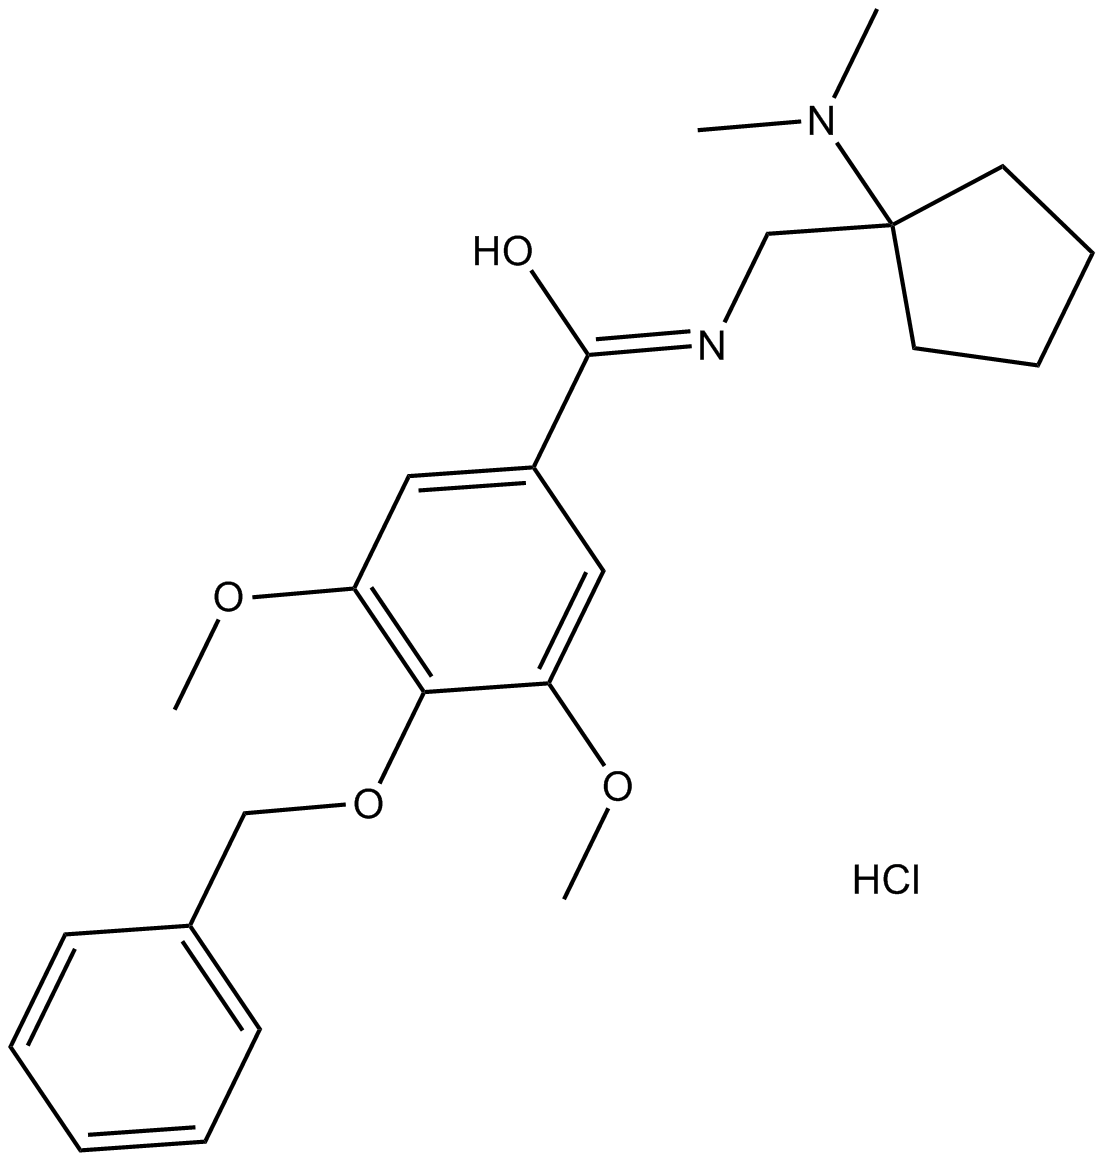 Org 25543 hydrochloride  Chemical Structure